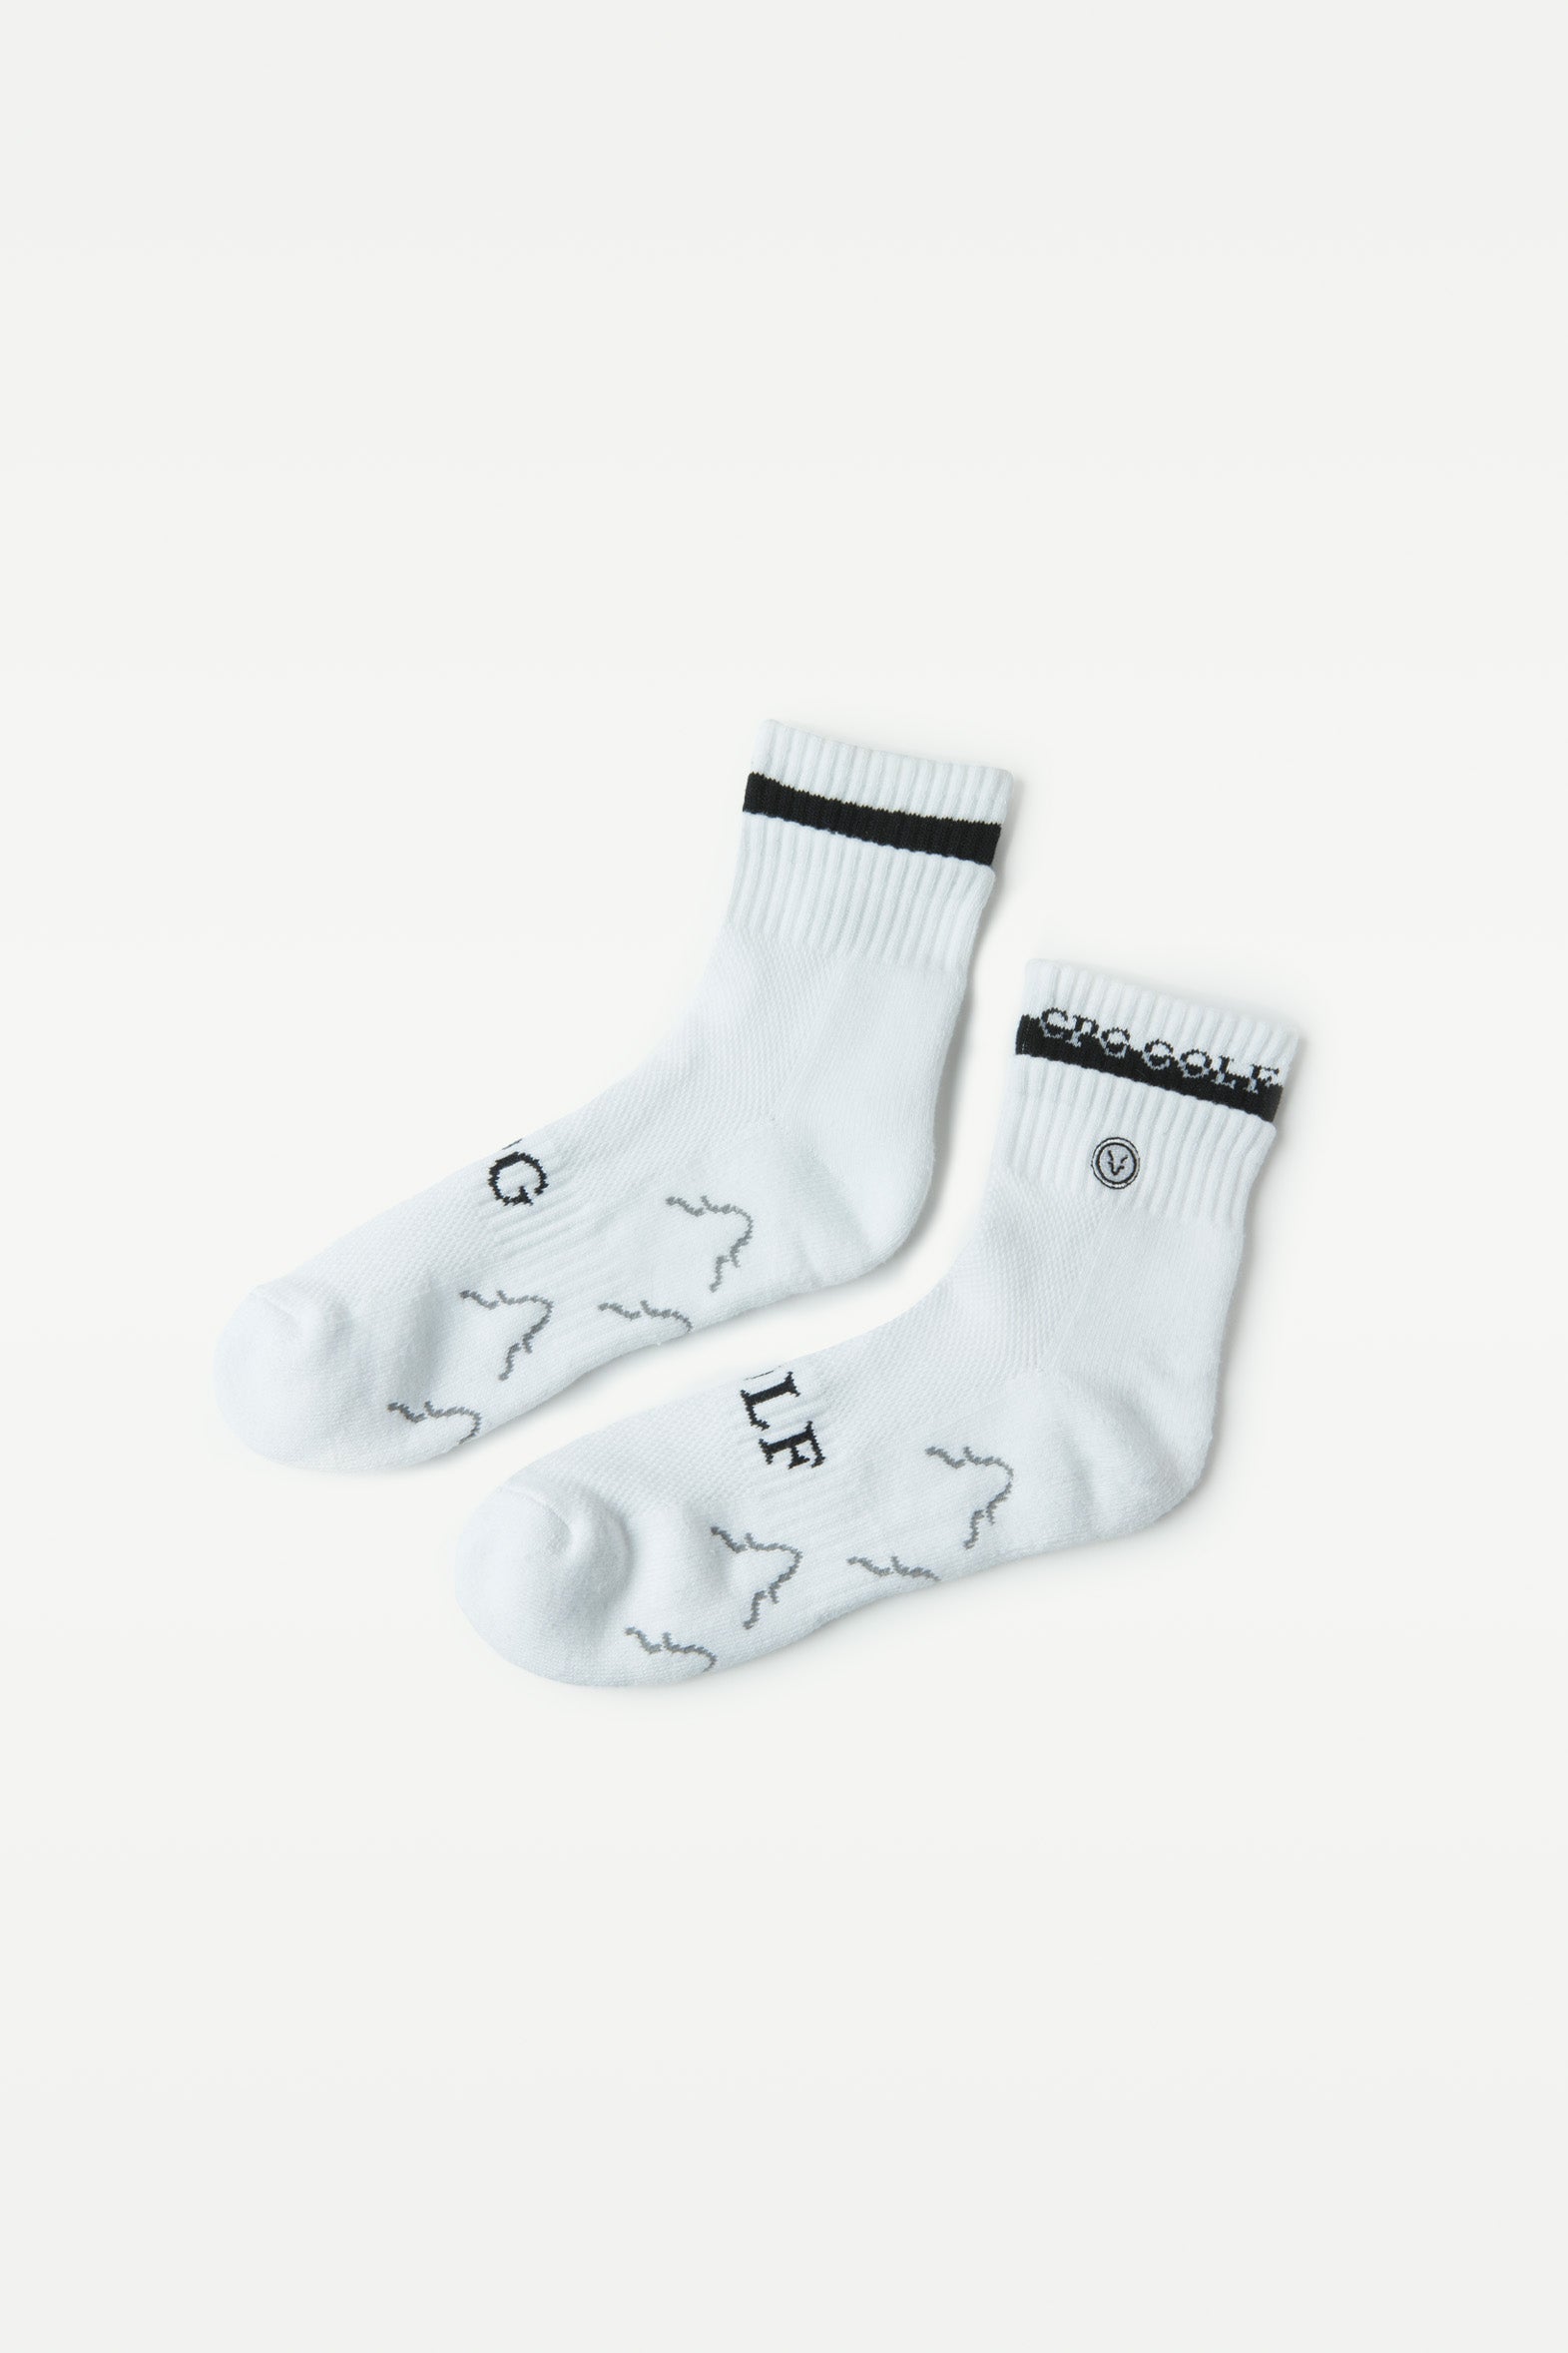 【New Arrival】CPG UNCLE SOX｜MEN